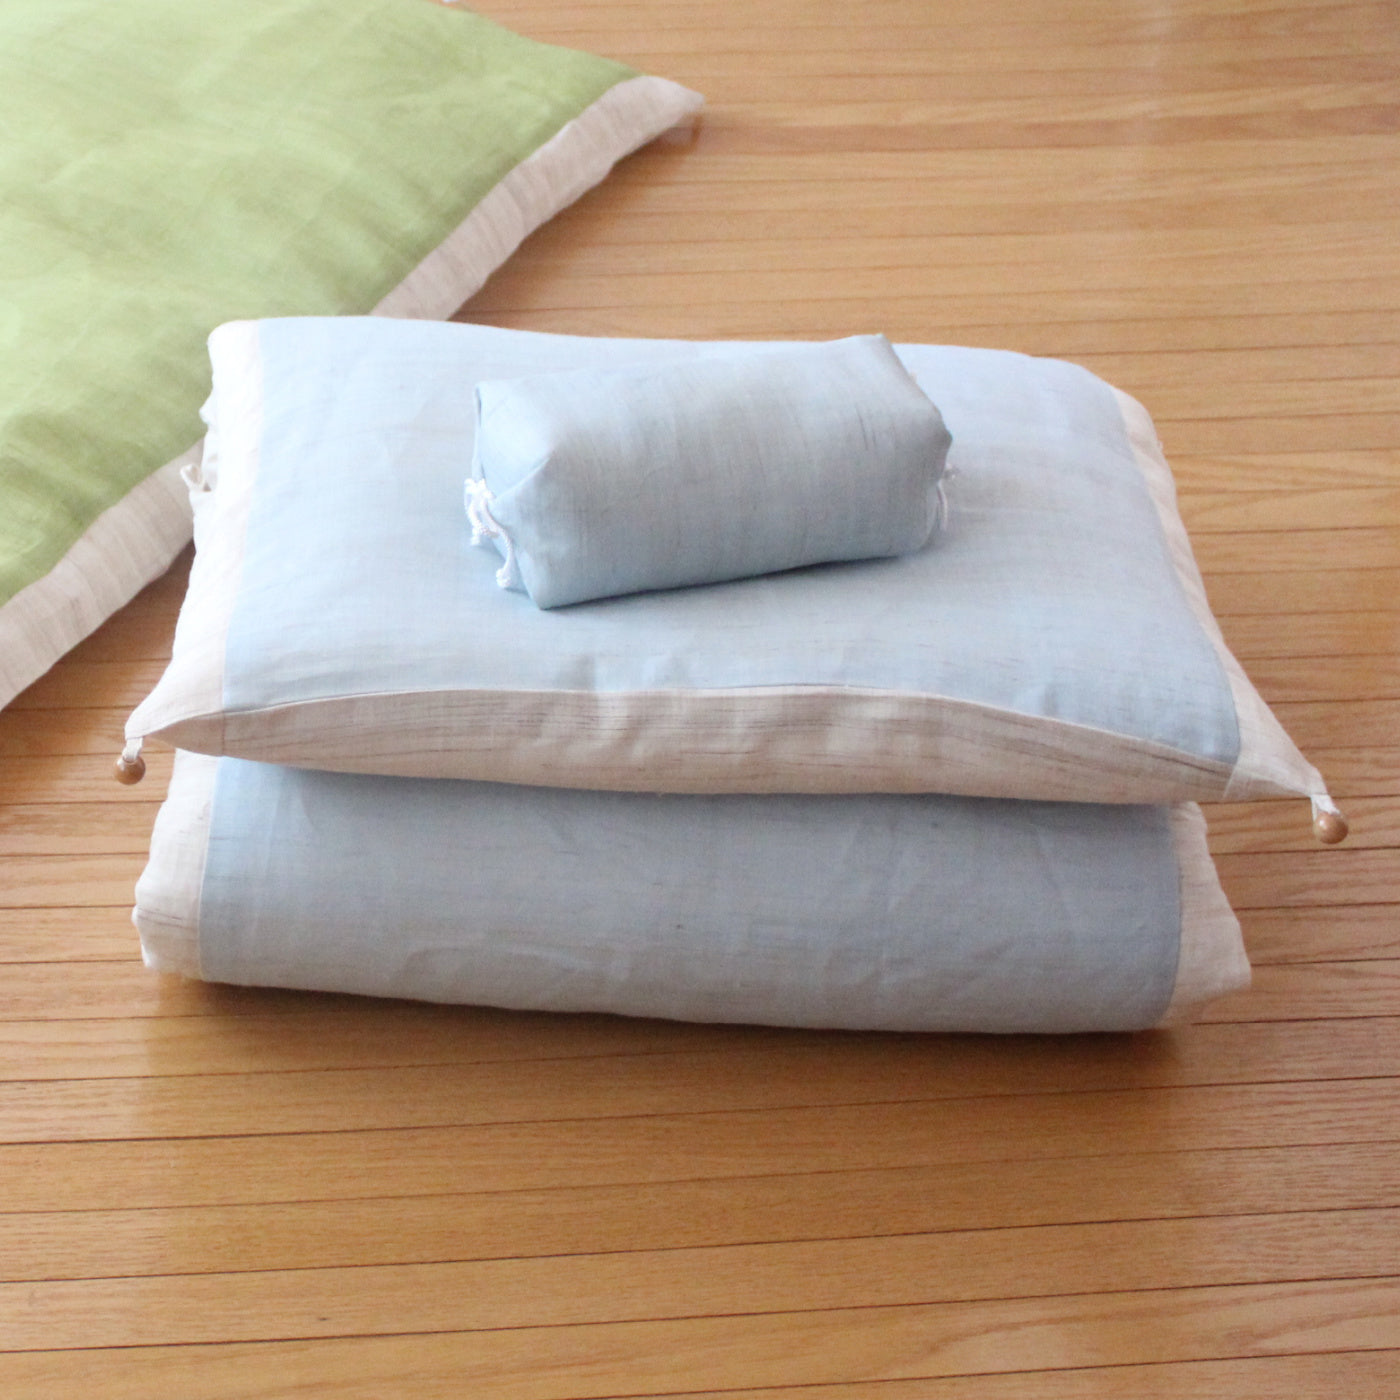 The name Gorone is a combination of two Japanese words: goron (ごろ) and ne (寝). Goron means to flop down and to make yourself comfortable, while ne means to sleep. Linen is good for summer and make you feel cool and refreshing.